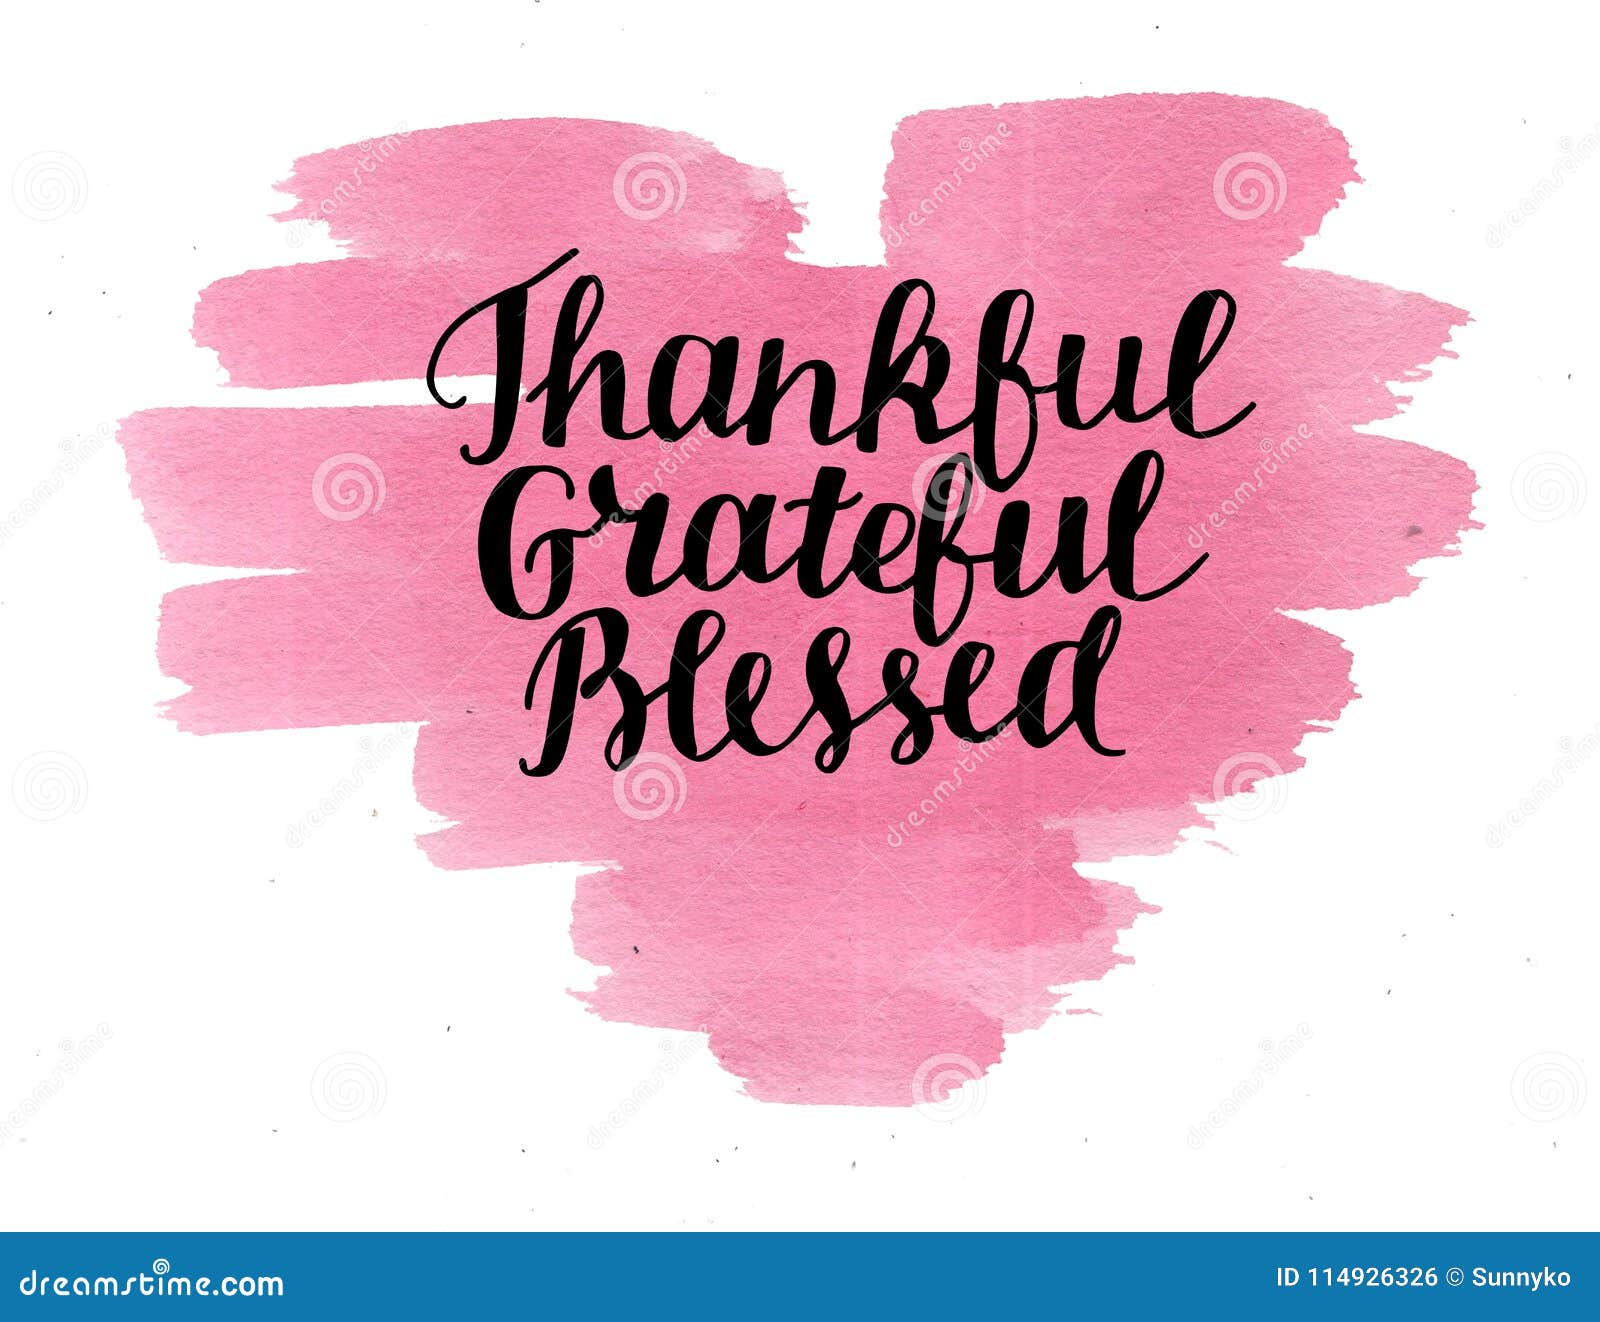 hand lettering thankful, grateful, blessed on watercolor heart.